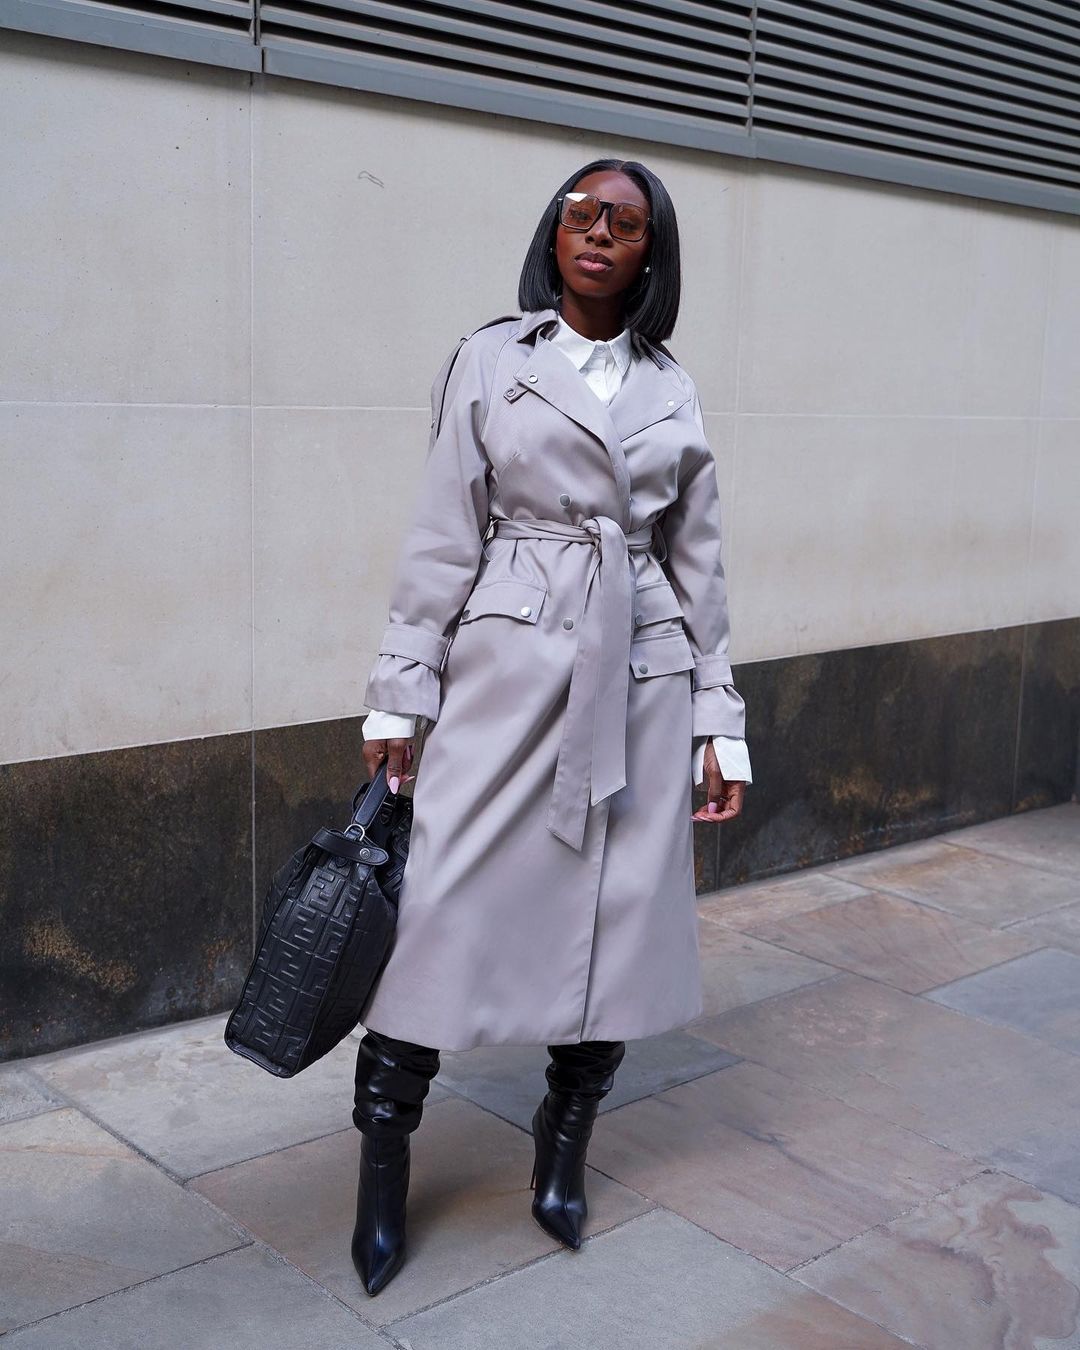 11 Workwear Outfit Inspiration for This Week Approved by GLAMCITYZ Editors